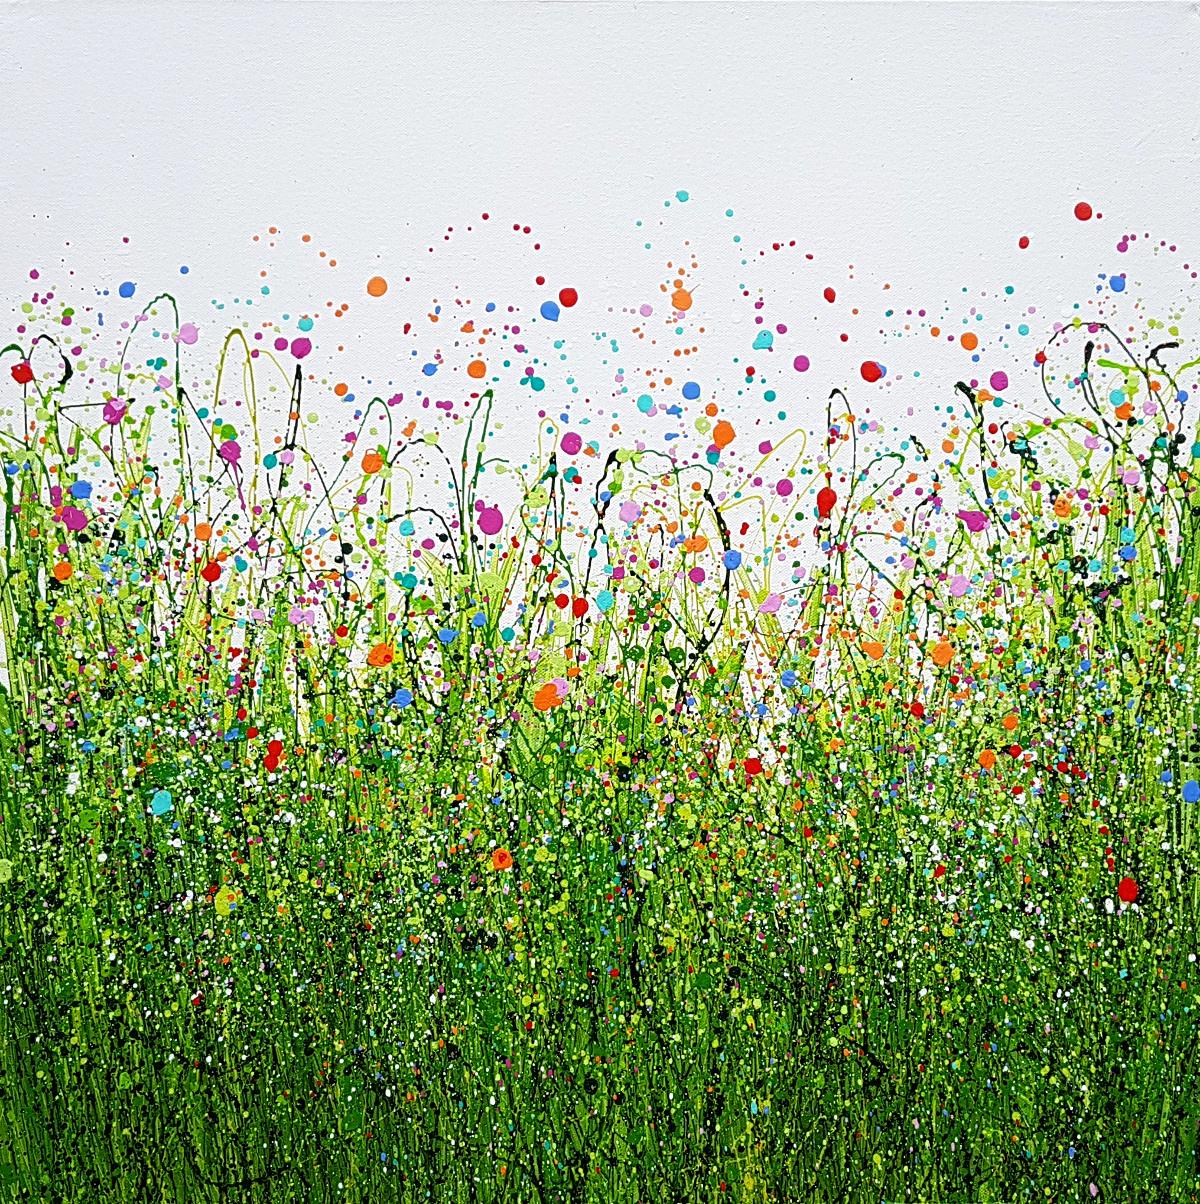 Lucy Moore  Abstract Painting - Painted Meadows #13 by Lucy Moore, Contemporary painting, original painting